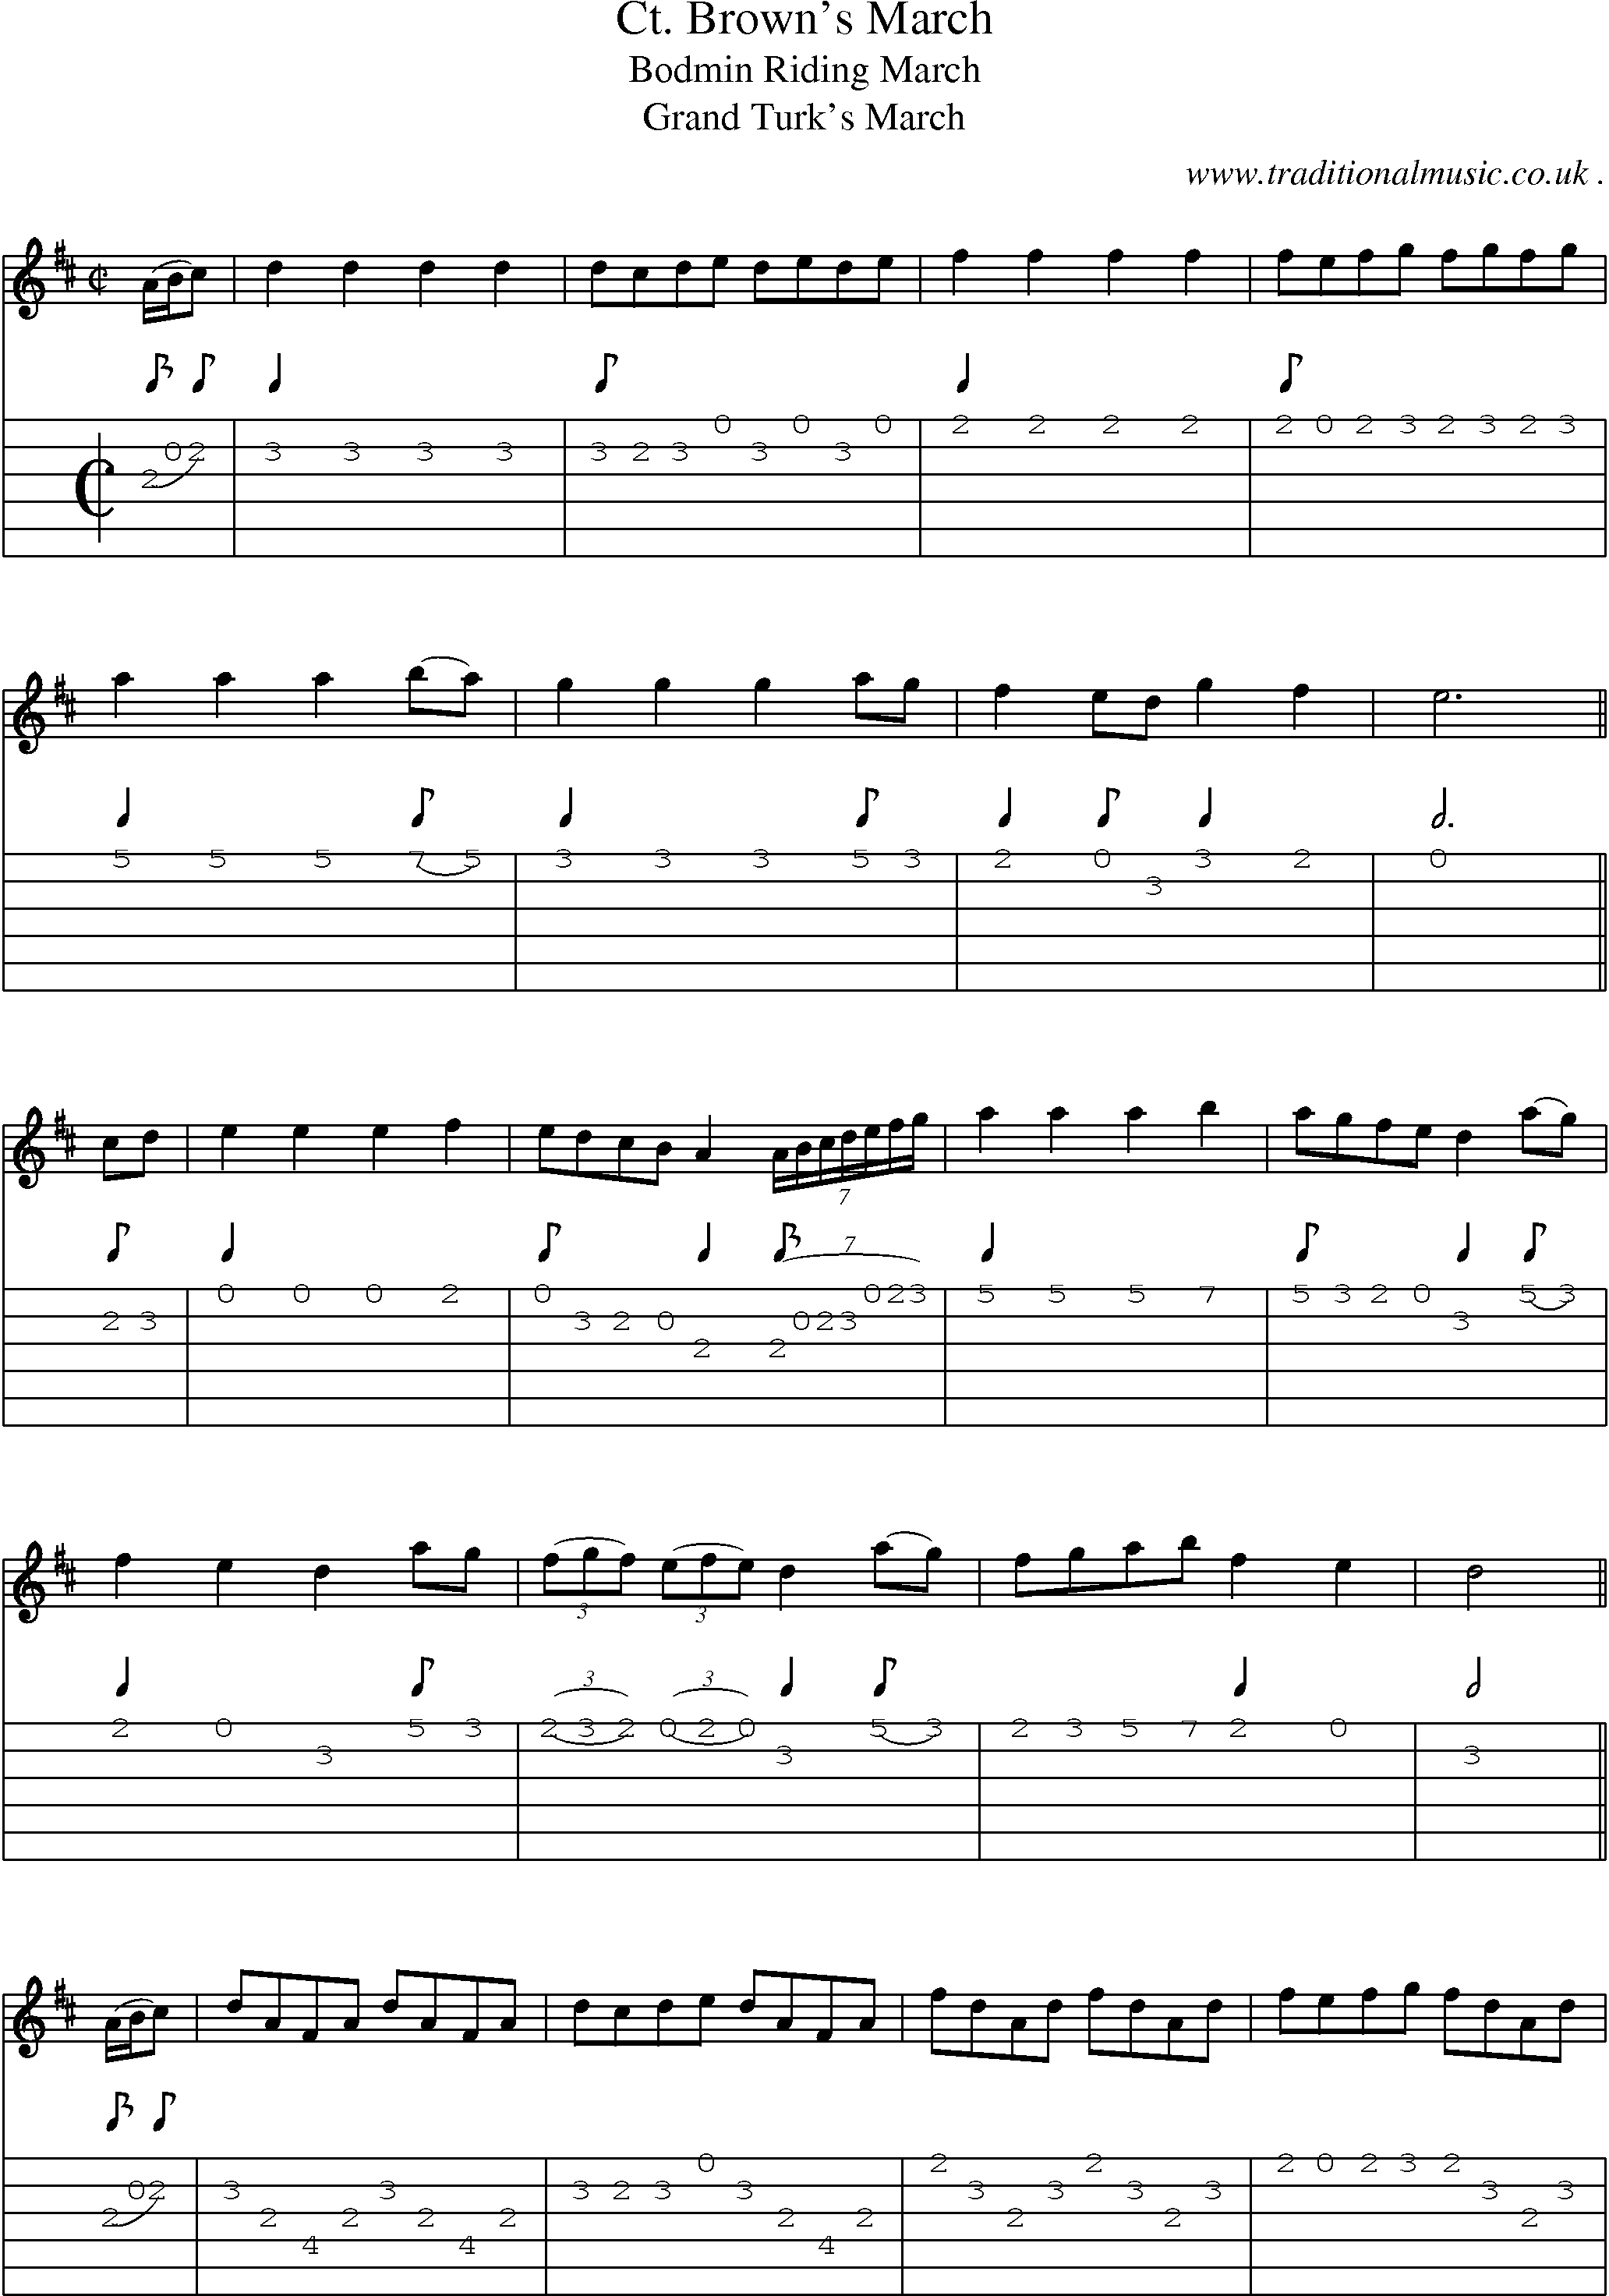 Sheet-Music and Guitar Tabs for Ct Browns March